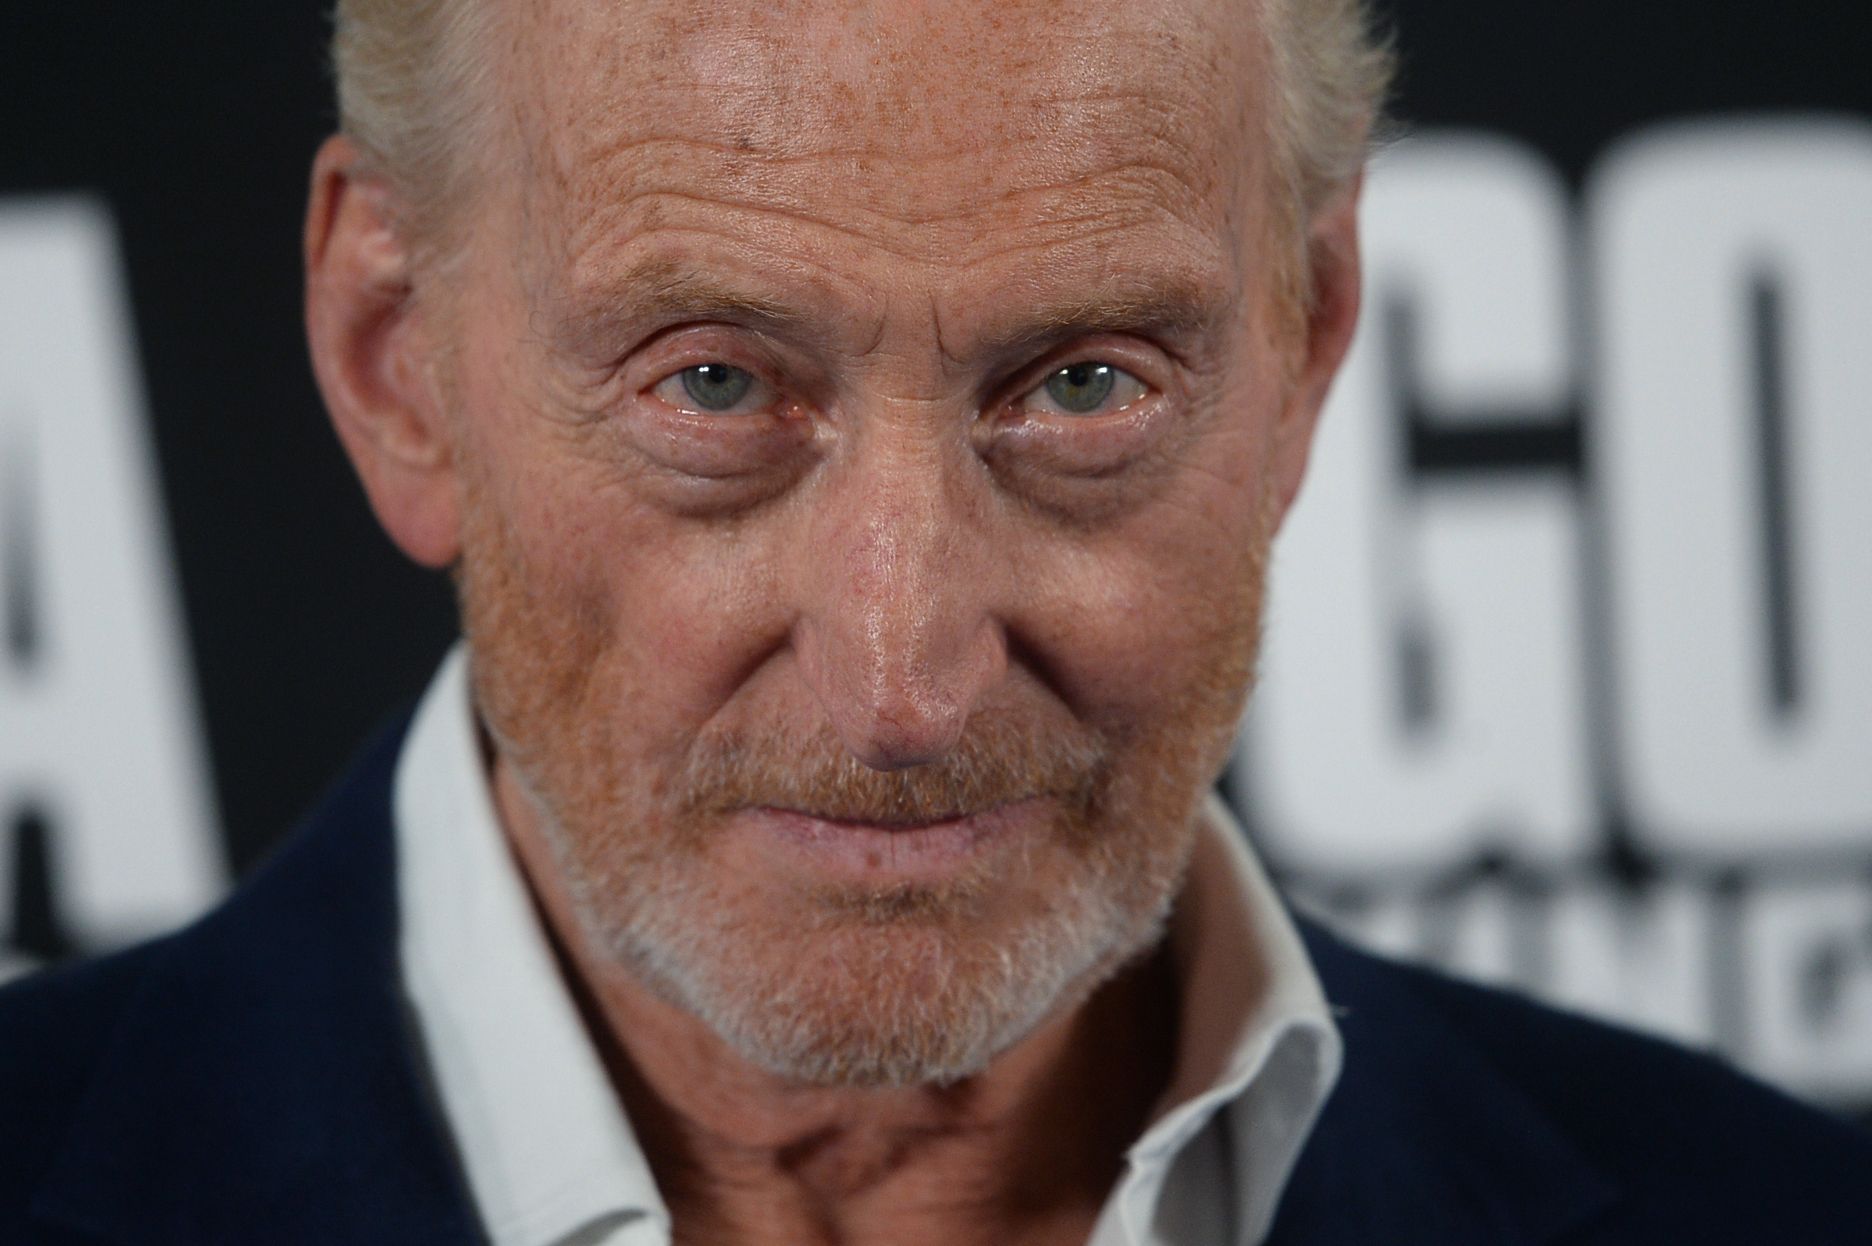 Charles Dance at the premiere of "GODZILLA II King of the Monsters" in 2019 in London, England | Source: Getty Images